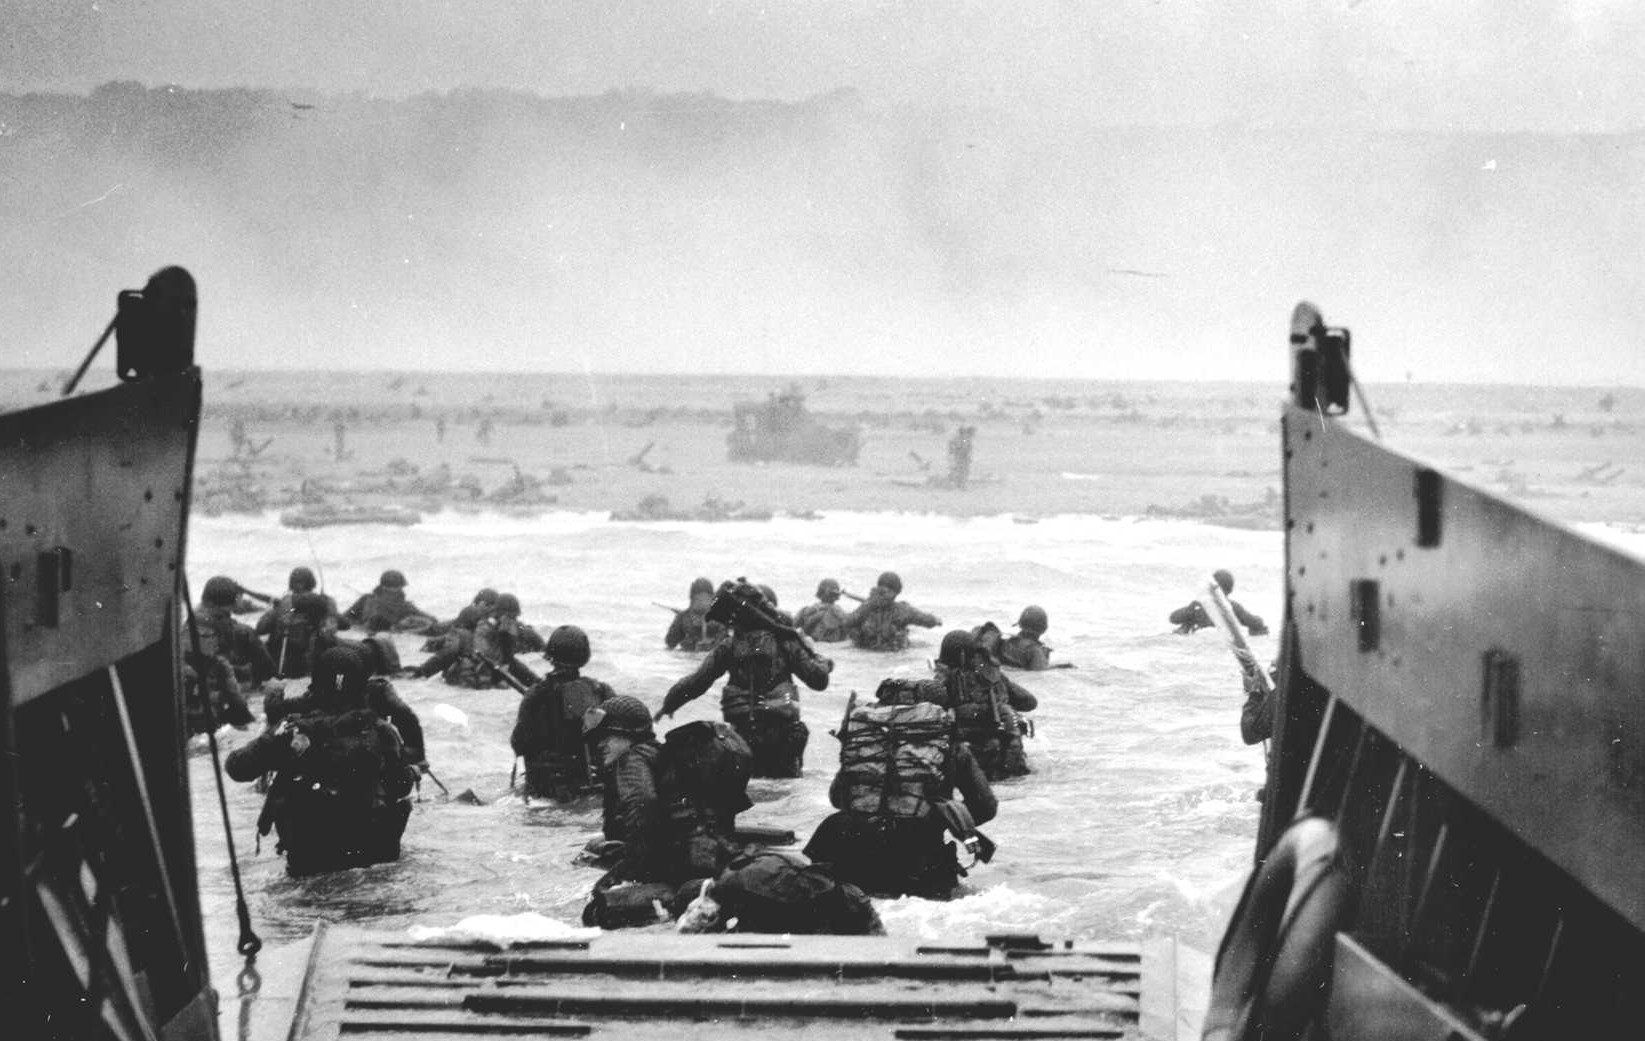 Remembering D-Day: Key facts, figures about epochal World War II invasion